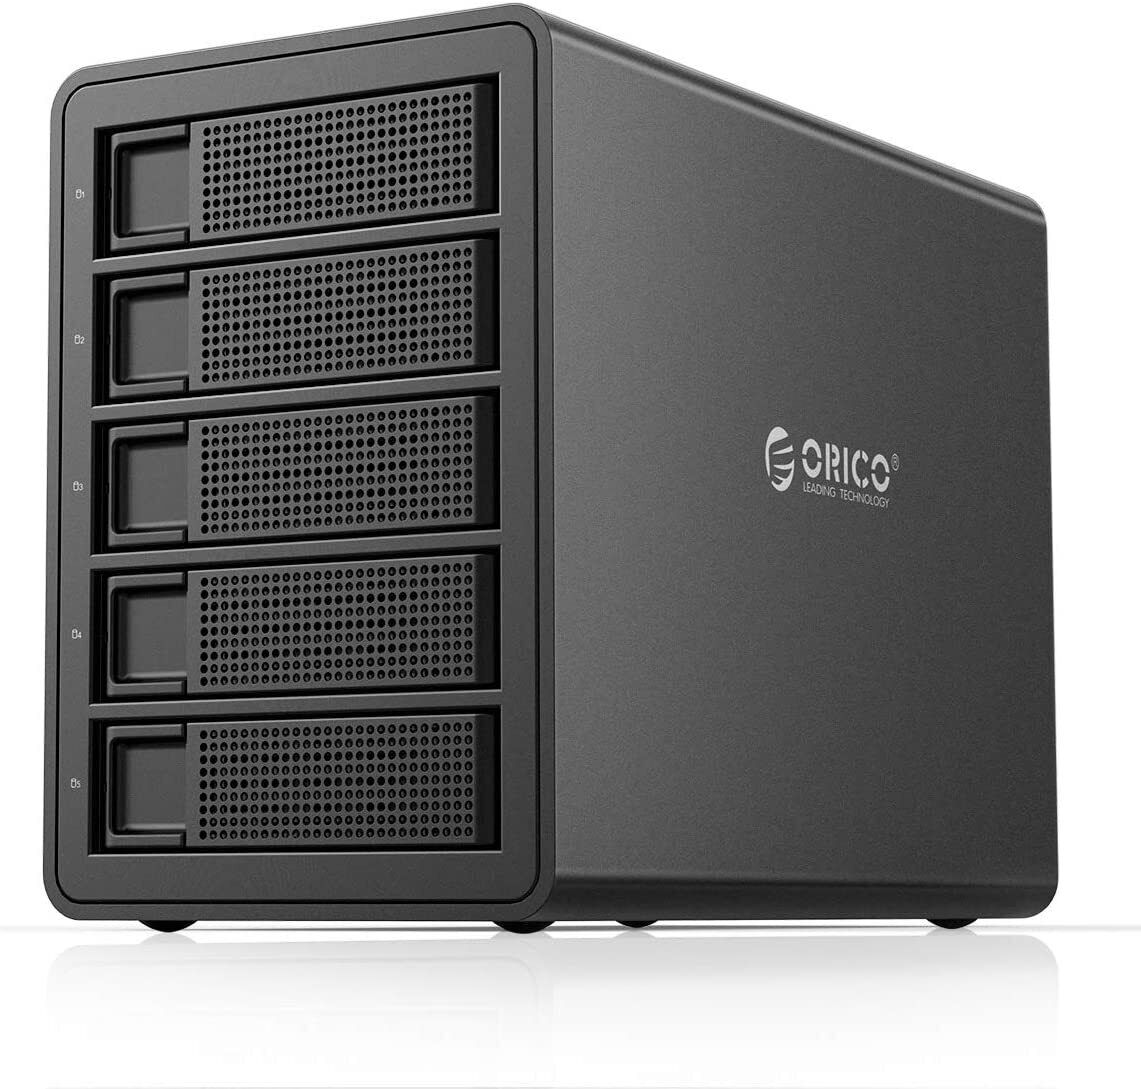 ORICO 2/4/5 Bay Hard Drive Enclosure USB3.0 to SATA 80TB for 2.5/3.5 in HDD SSD